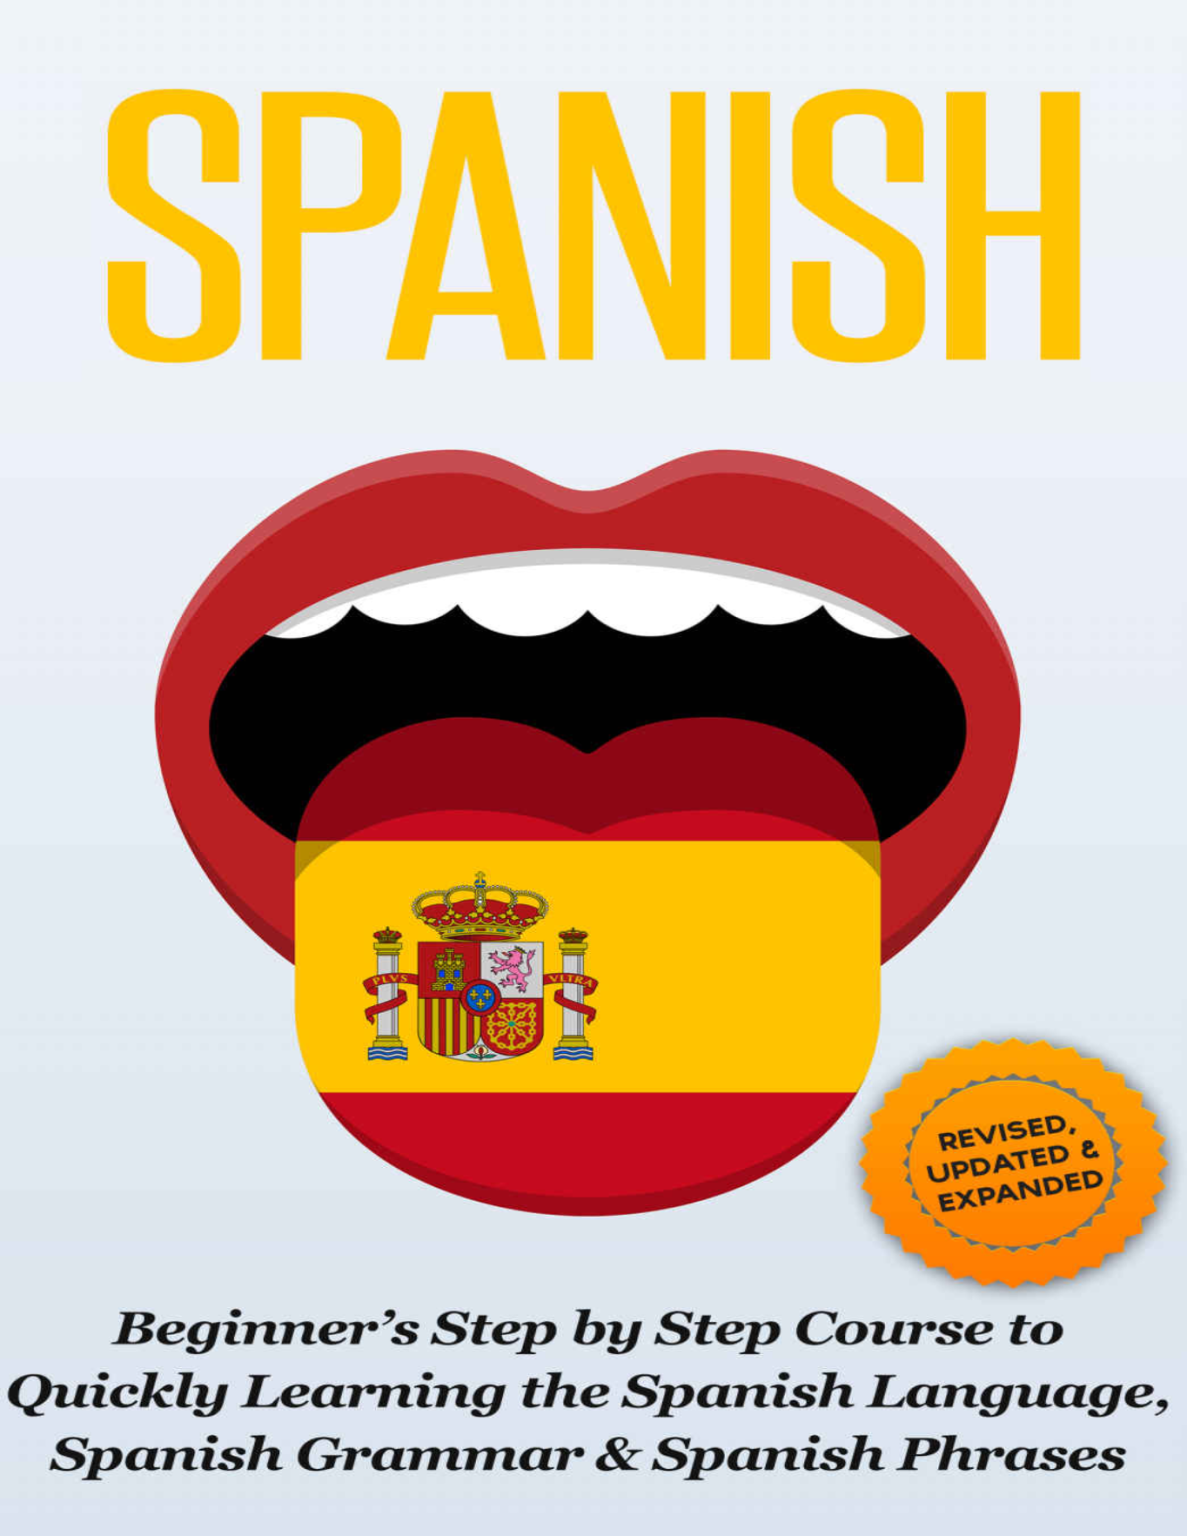 Rich results on Google's SERP when searching for ''Spanish-Revised-Expanded-Beginners''